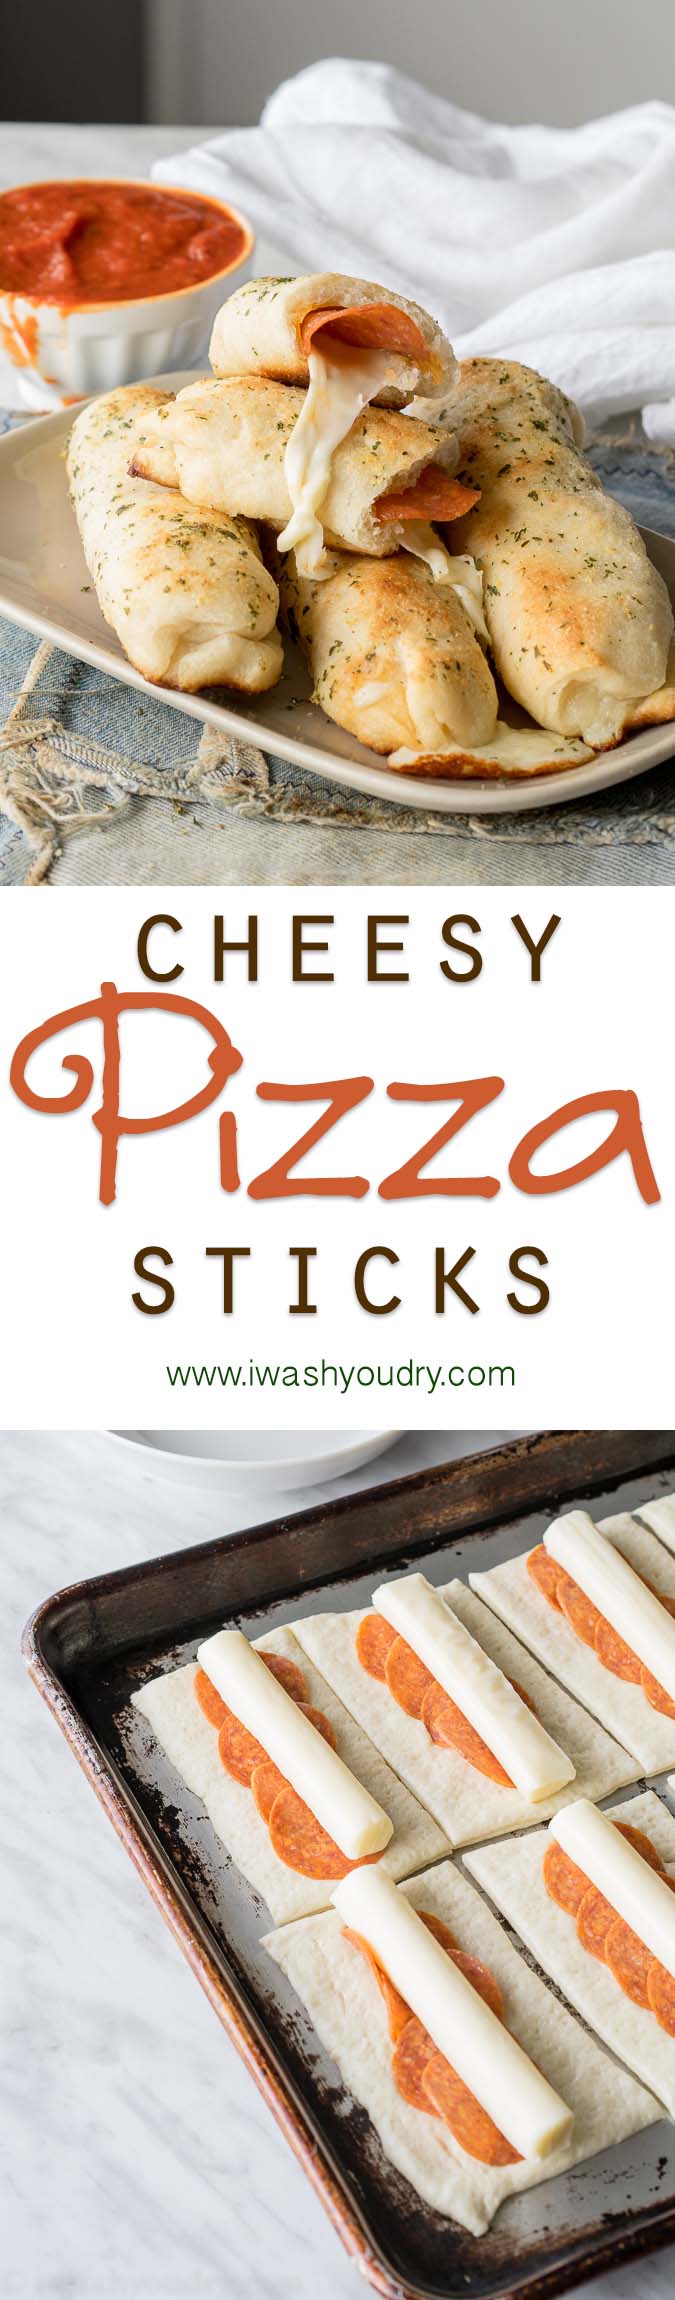 Super easy Cheesy Pepperoni Pizza Sticks! Just 6 ingredients and my kids totally loved them!